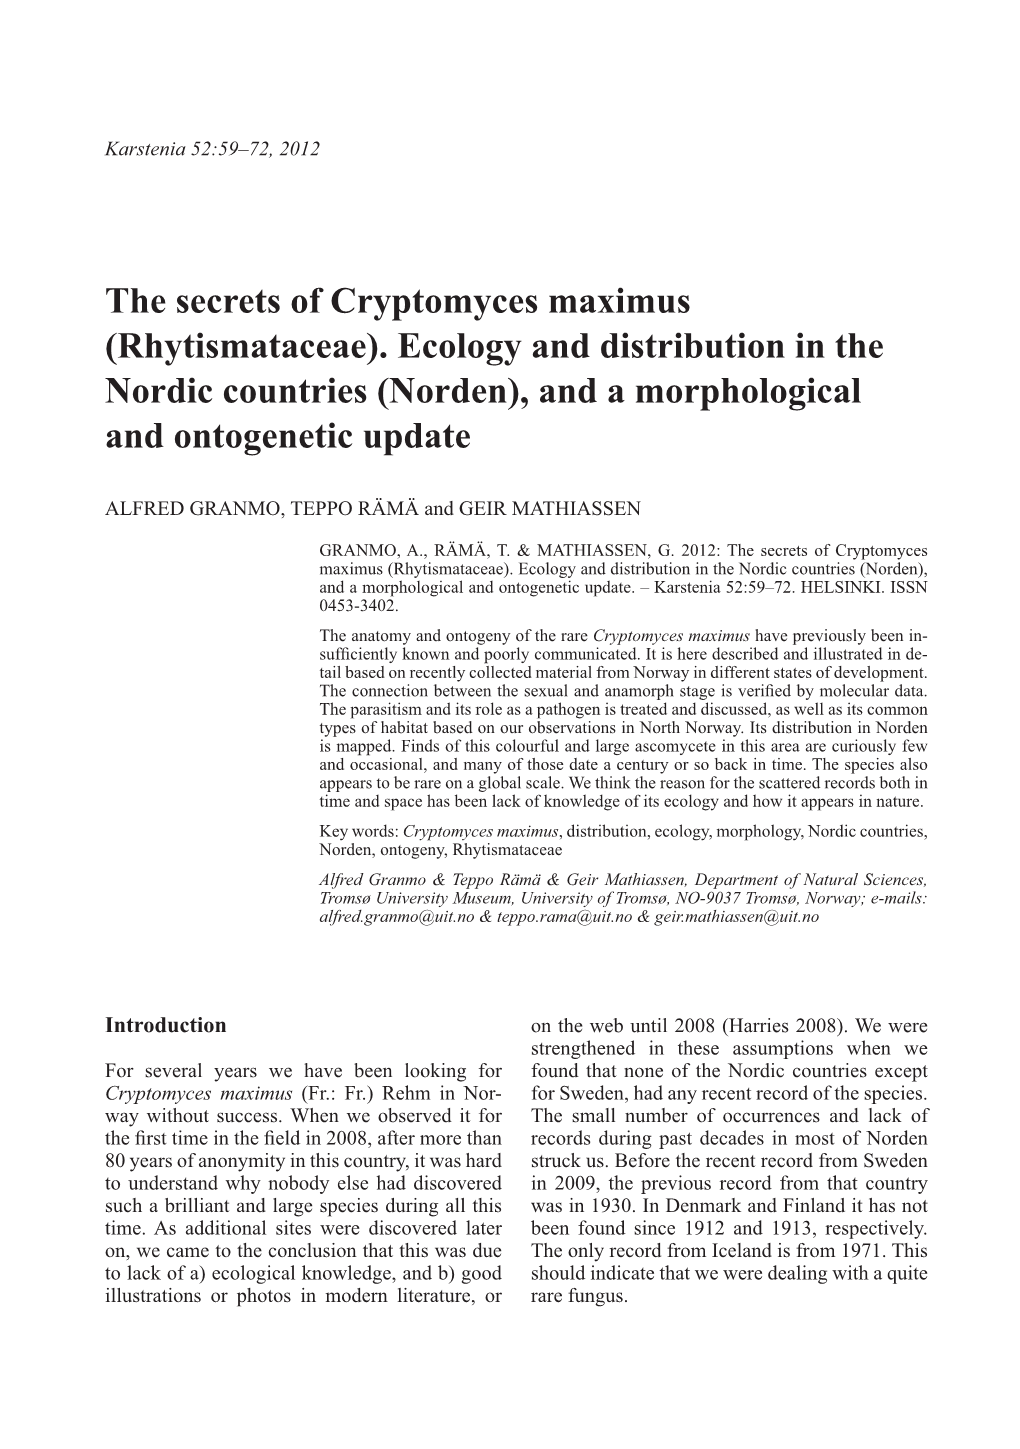 The Secrets of Cryptomyces Maximus (Rhytismataceae). Ecology and Distribution in the Nordic Countries (Norden), and a Morphological and Ontogenetic Update